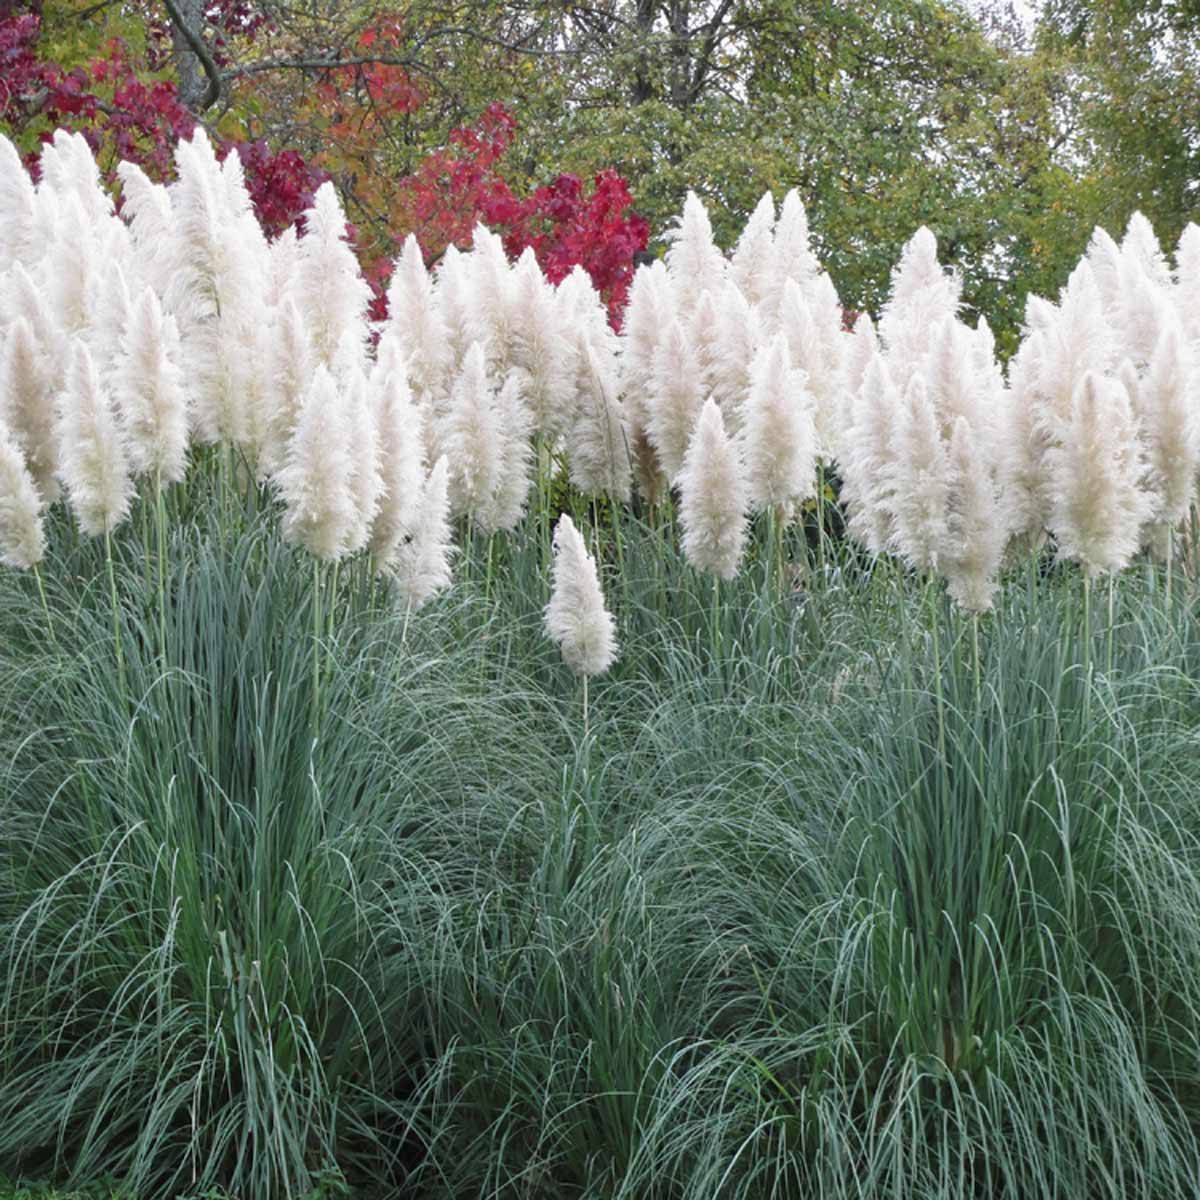 10 Ornamental Grasses to Grow in Your Yard